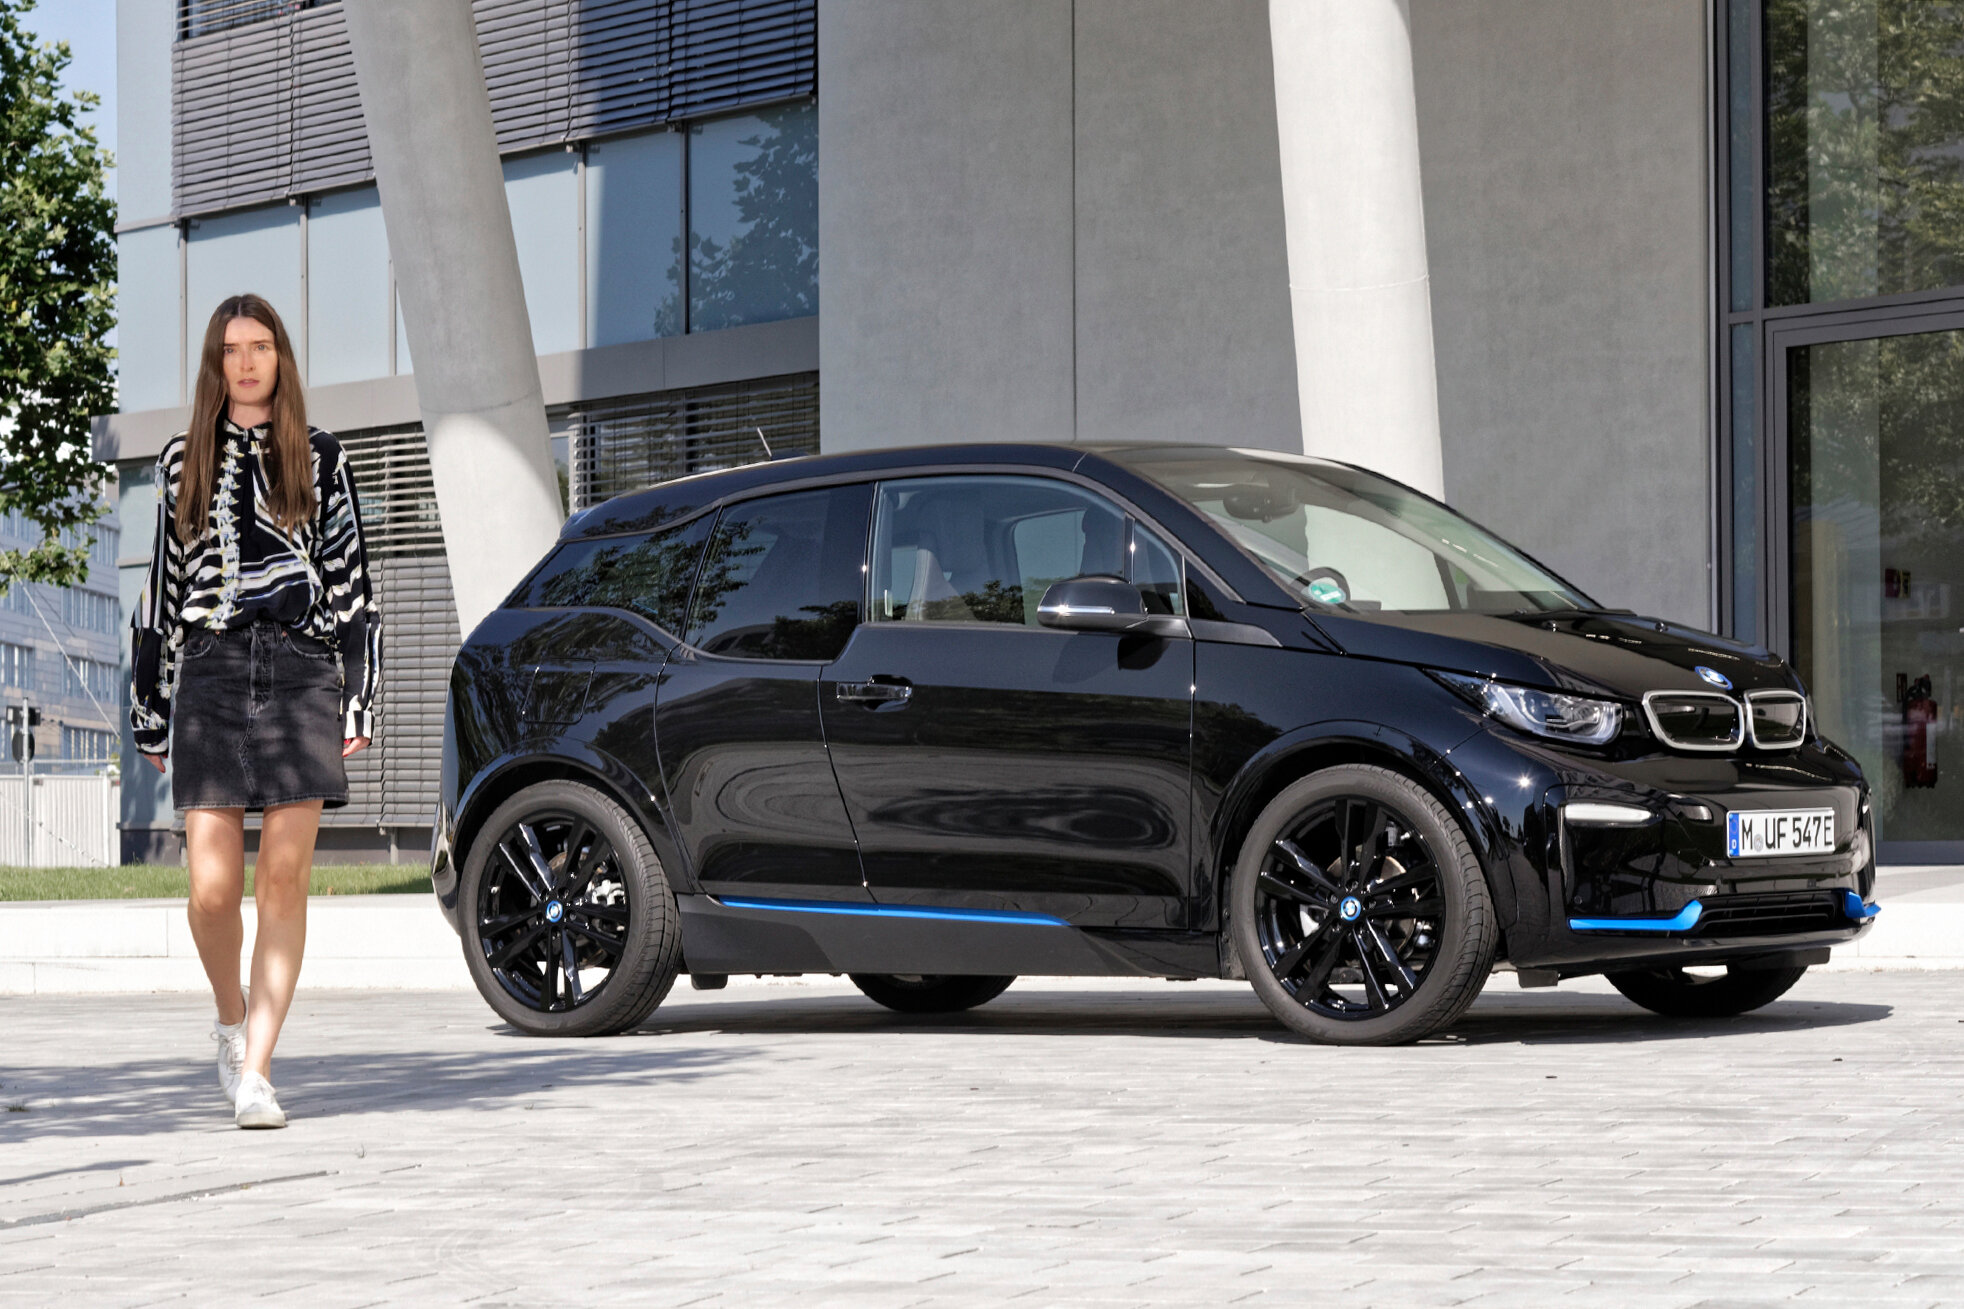 ellectric — The BMW i3 – setting a trend for the future of urban